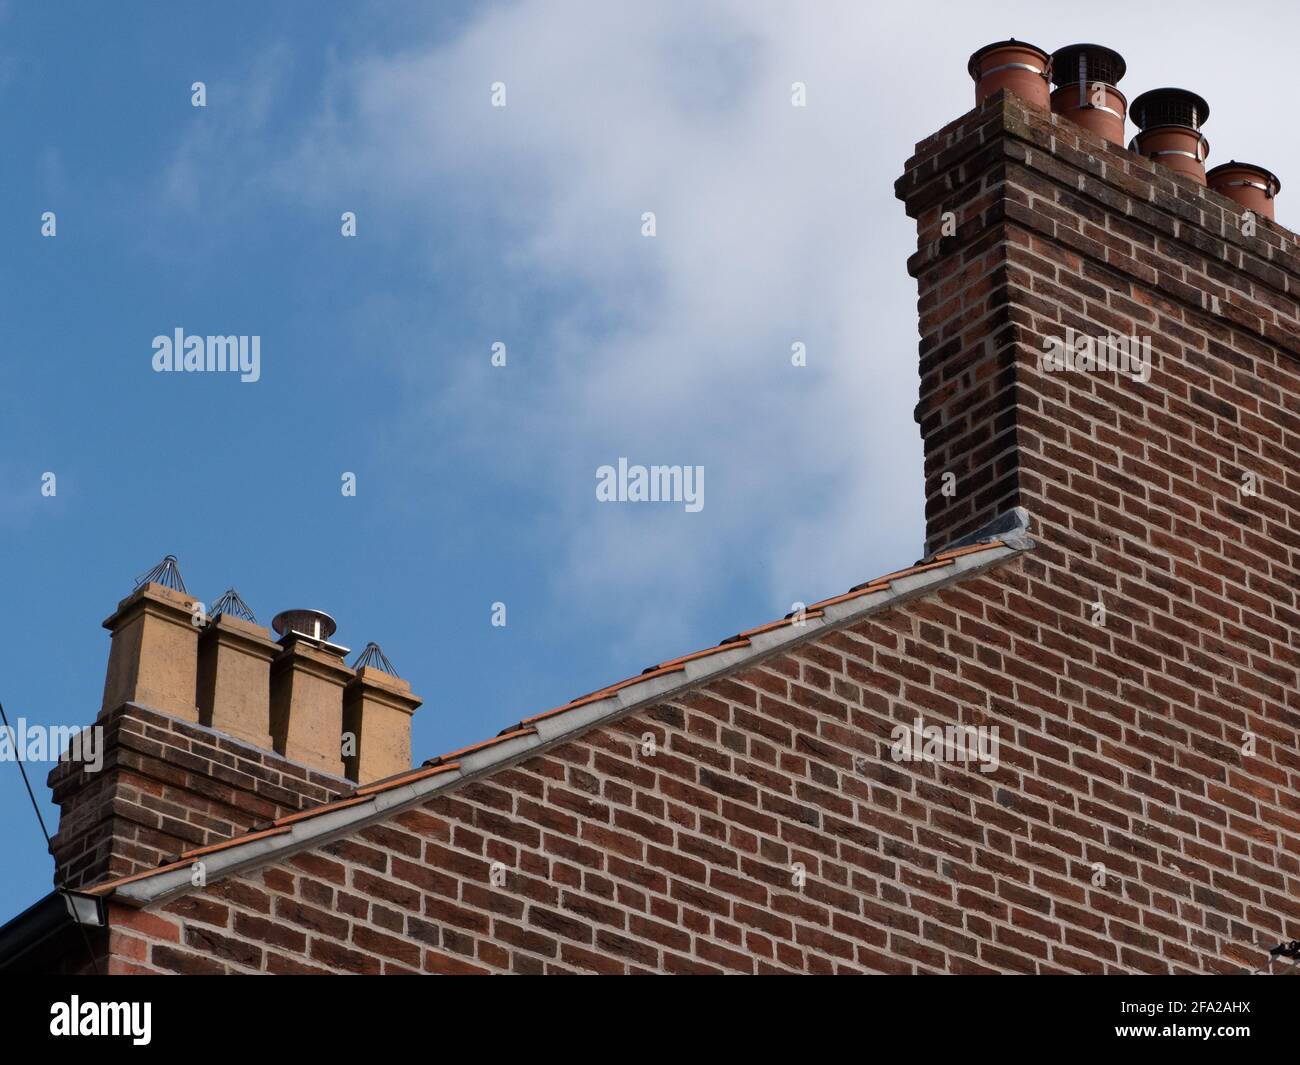 Chimney stack on a gable end of a brick but house in Westbury, Wiltshire, England, UK. Stock Photo